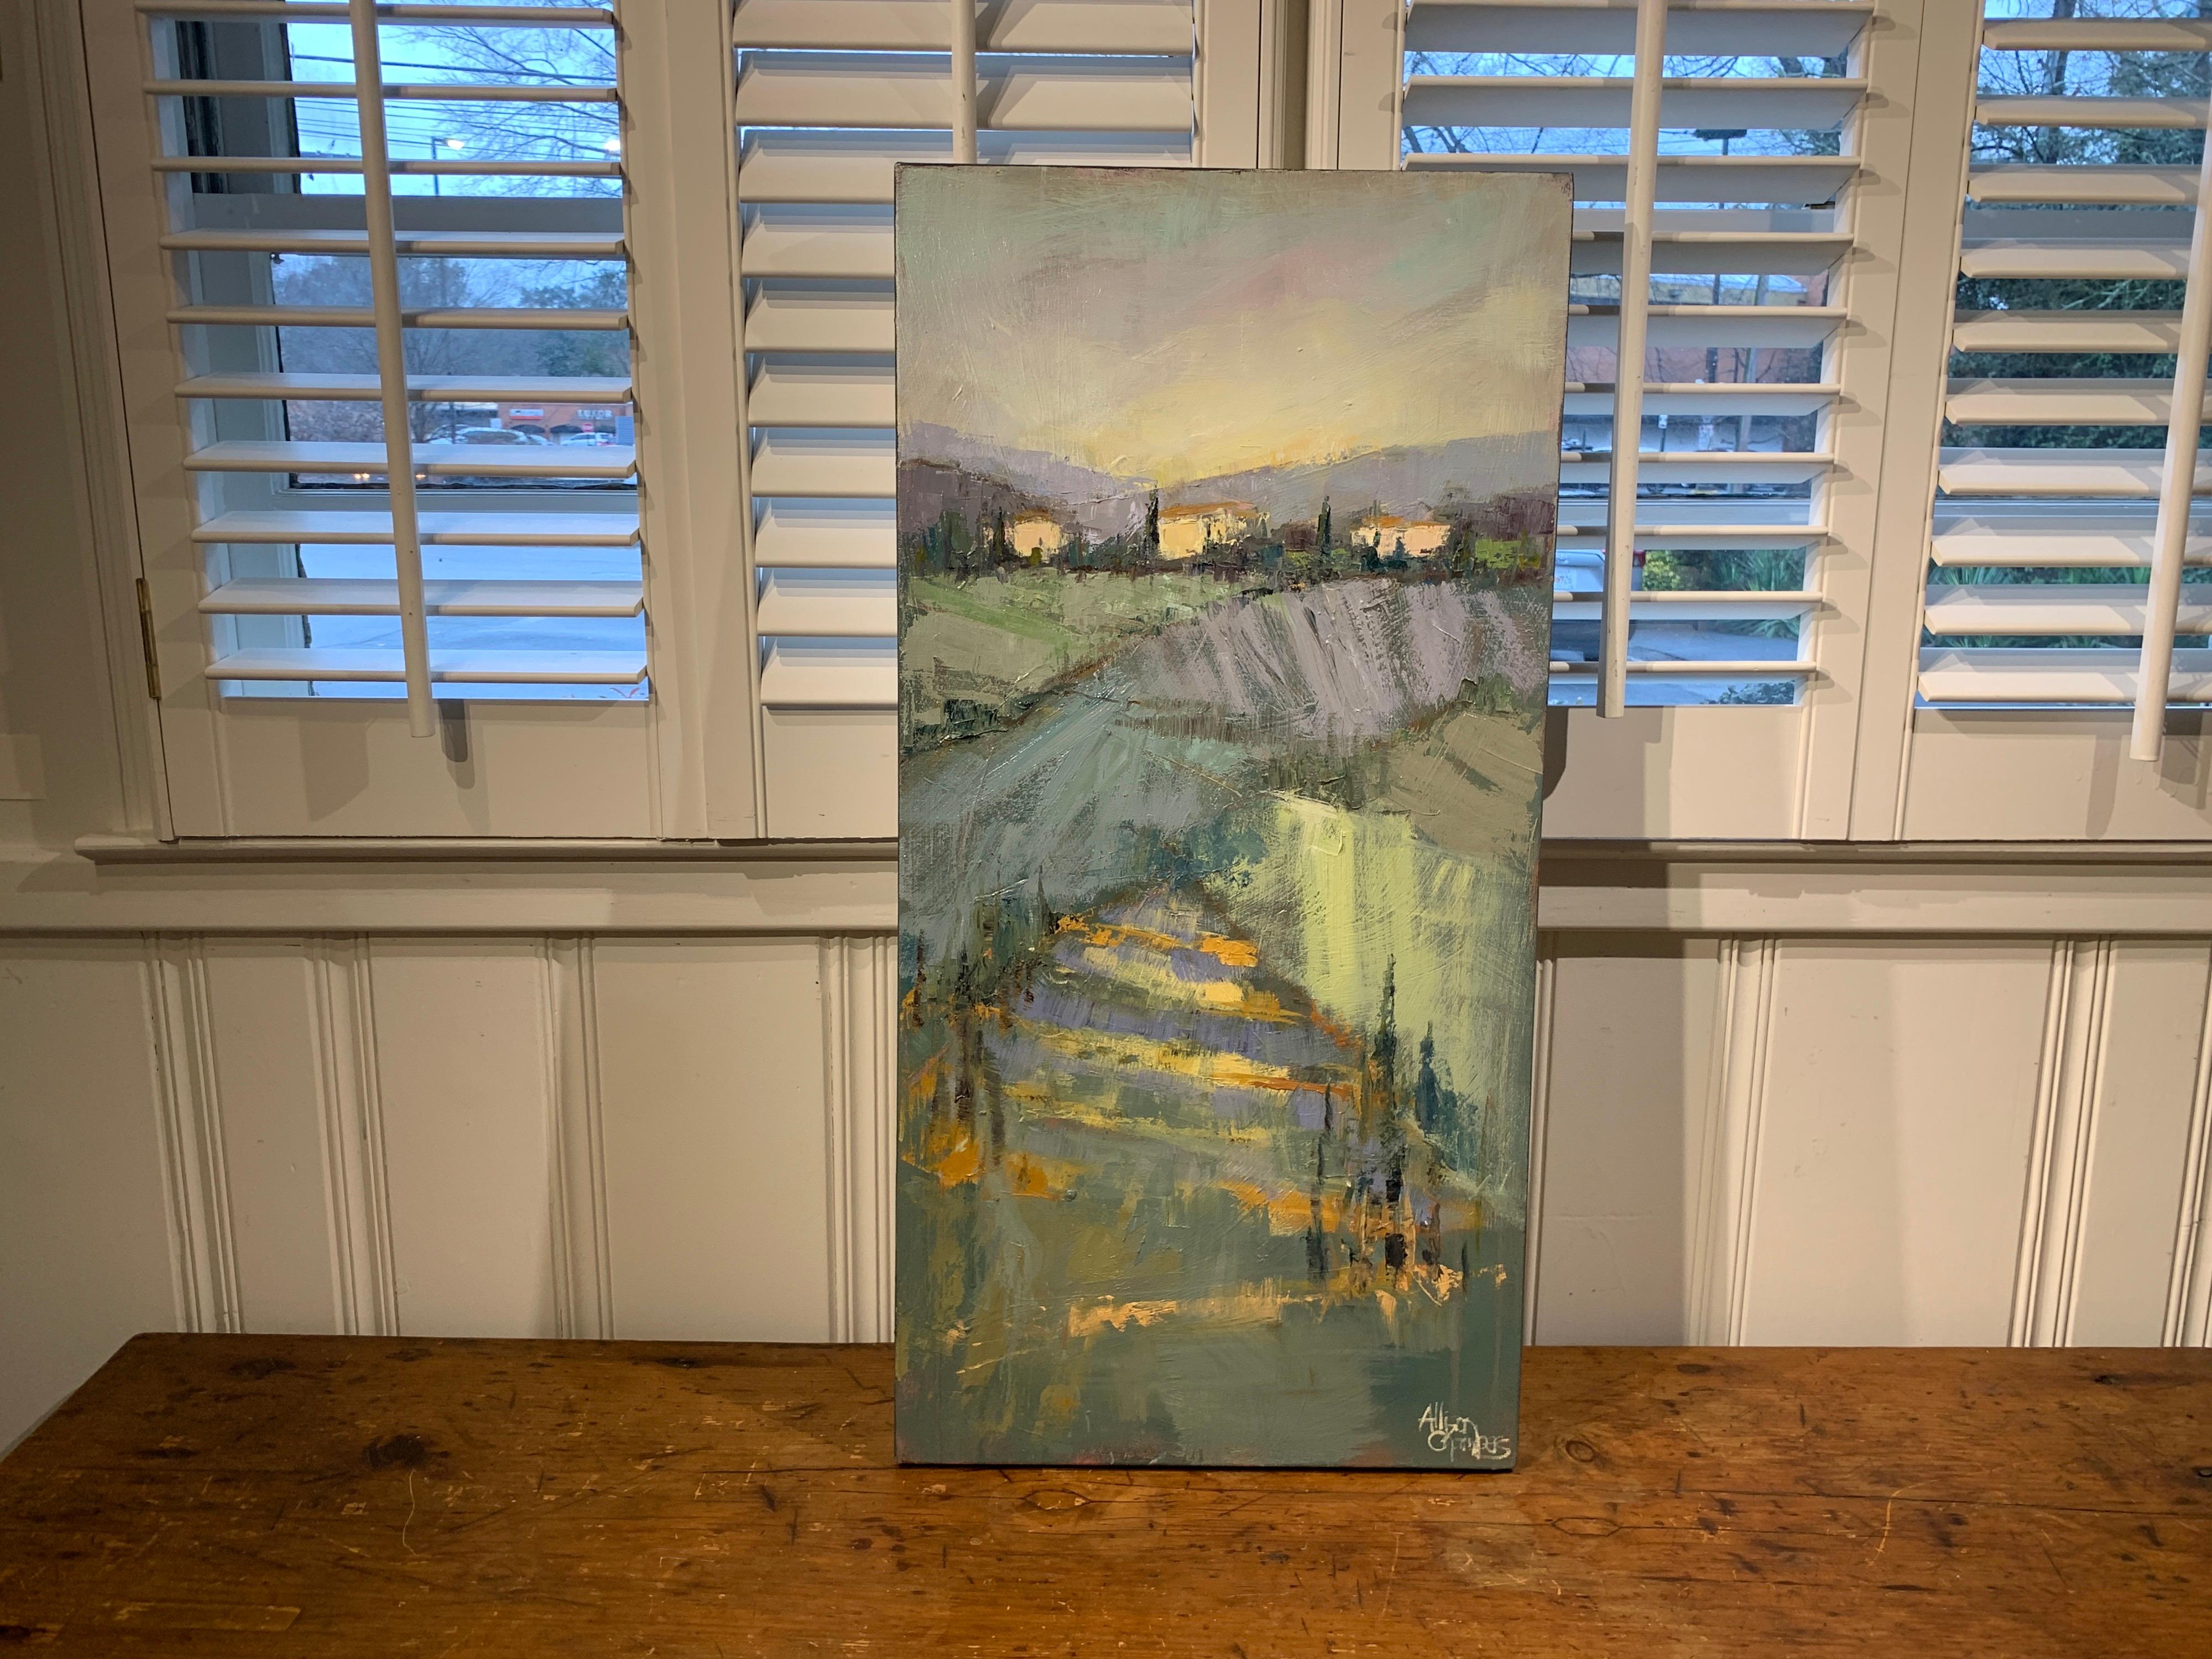 'Take Me Back' is an Impressionist oil on canvas painting created by American artist Allison Chambers in 2021. Featuring a palette made of green, blue, neutral and purple tones, the painting depicts a vineyard leading our eye to the purple-shaded